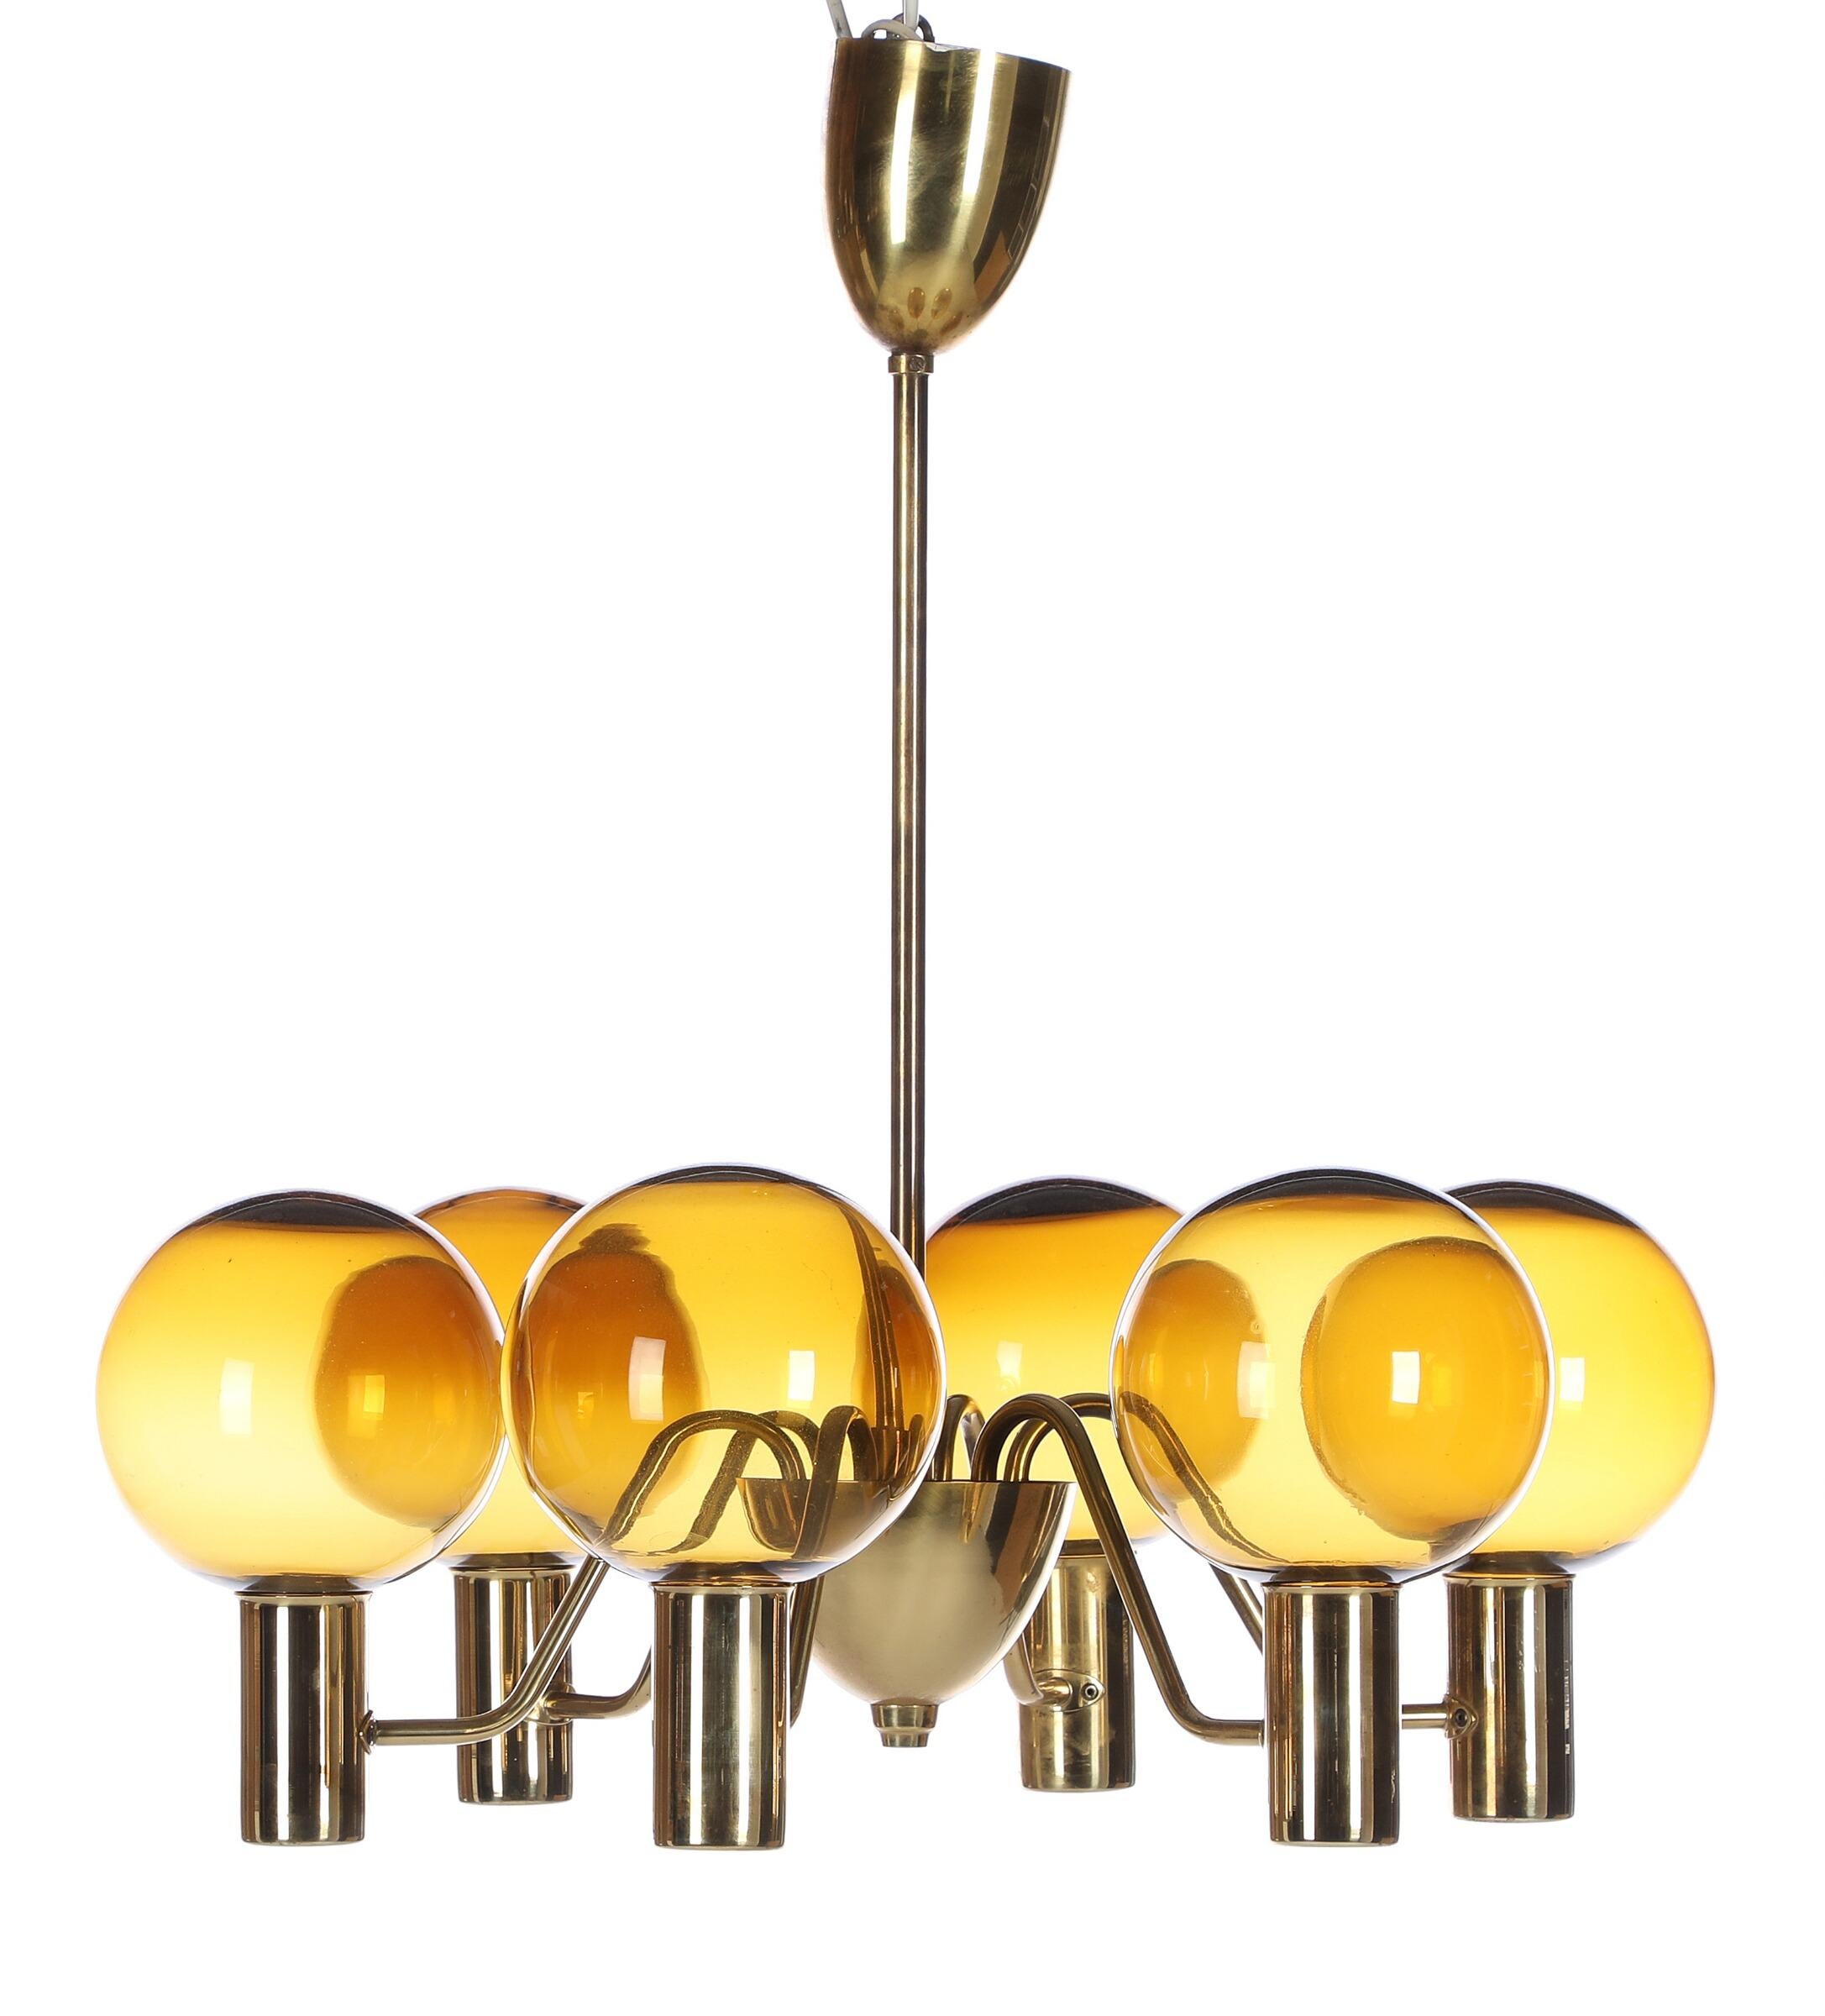 T372 / 6 Patricia chandelier was designed in the 1960s by Hans-Agne Jakobsson and then edited by Hans-Agne Jakobsson AB in Markaryd in Sweden. Brass frame with 6 arms and 6 glass globes. These are original E14 sockets.
 